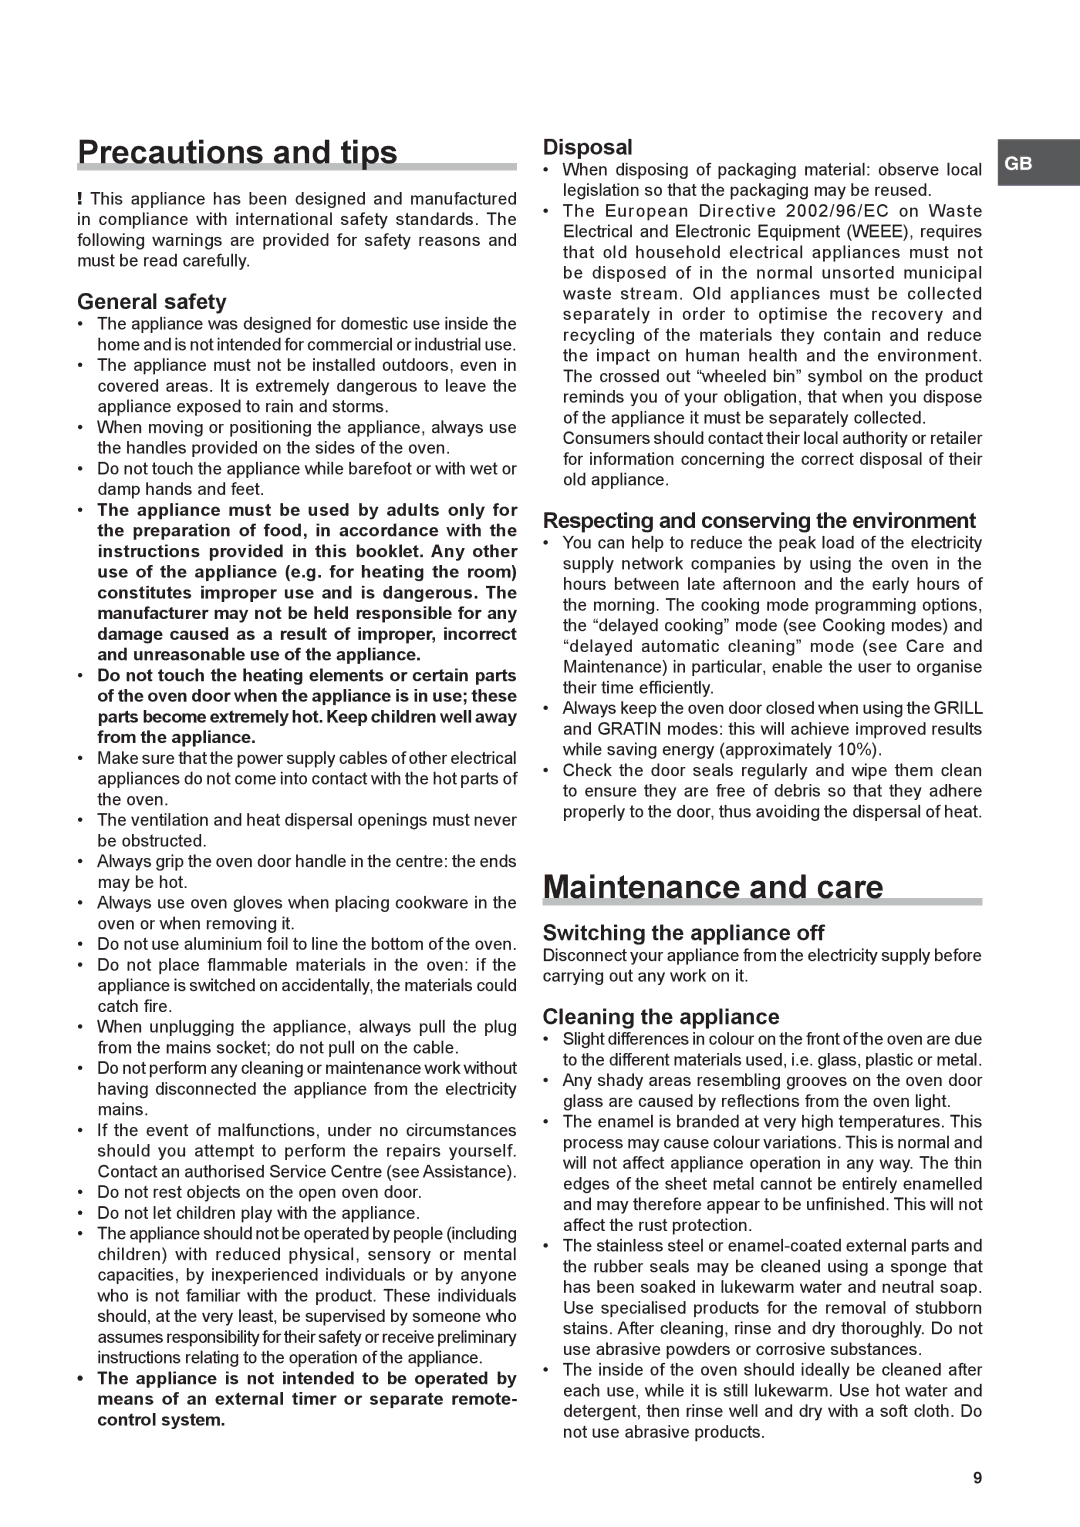 Hotpoint SBS51XS operating instructions Precautions and tips, Maintenance and care 